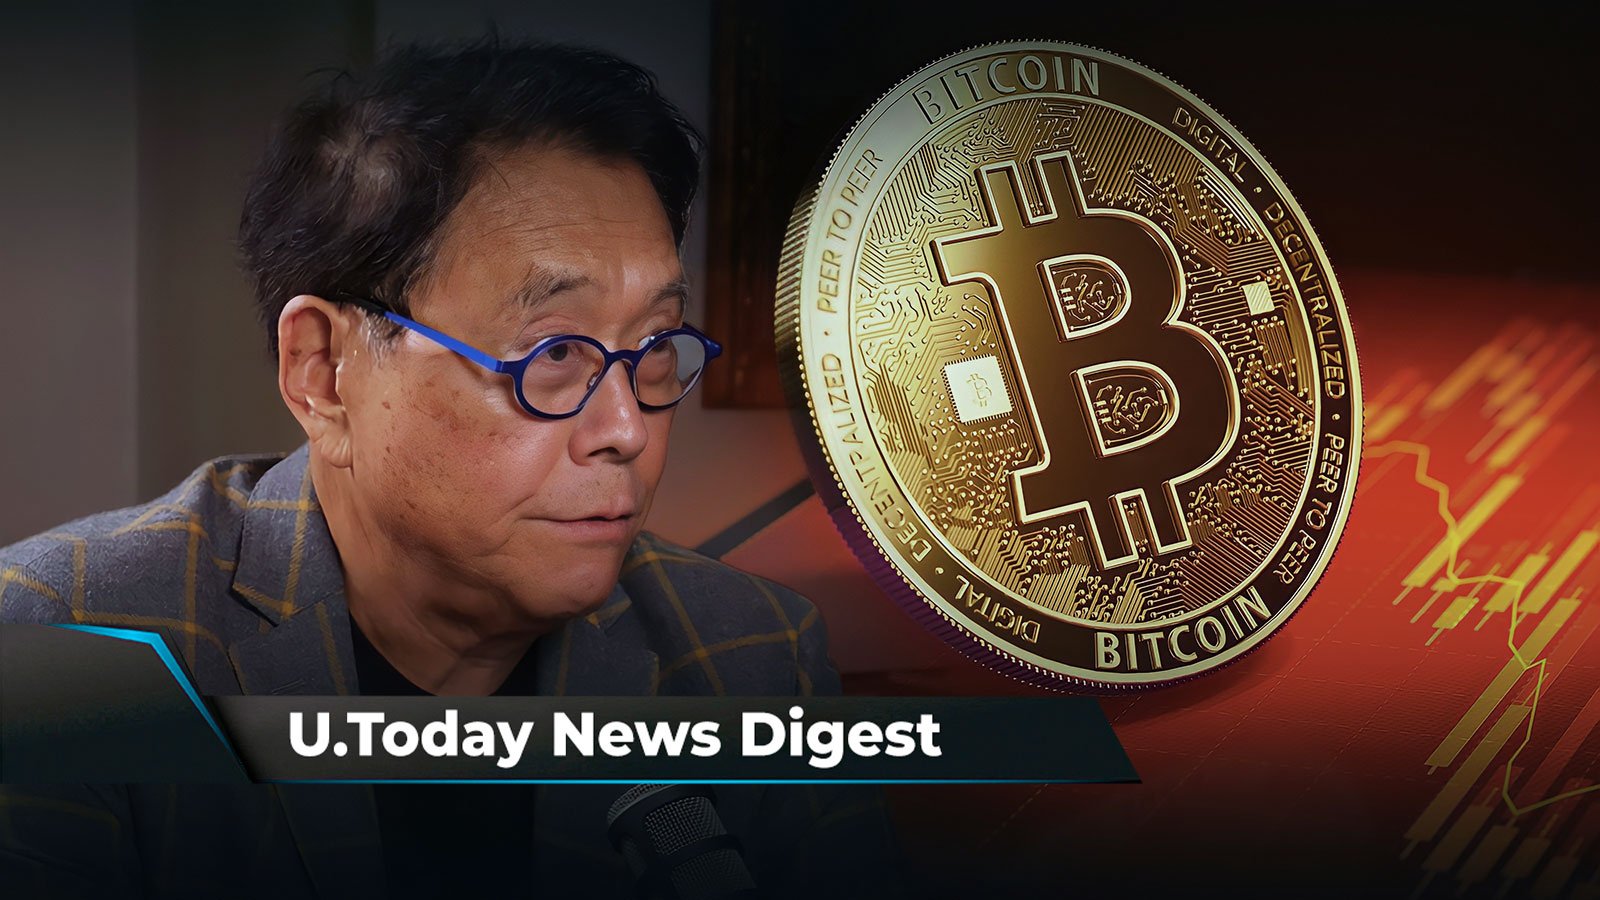 Here’s When XRP Will Take Off, BTC Plunges 5% in Minutes, "Rich Dad, Poor Dad" Author Urges Getting into Crypto Before Market Crash: Crypto News Digest by U.Today